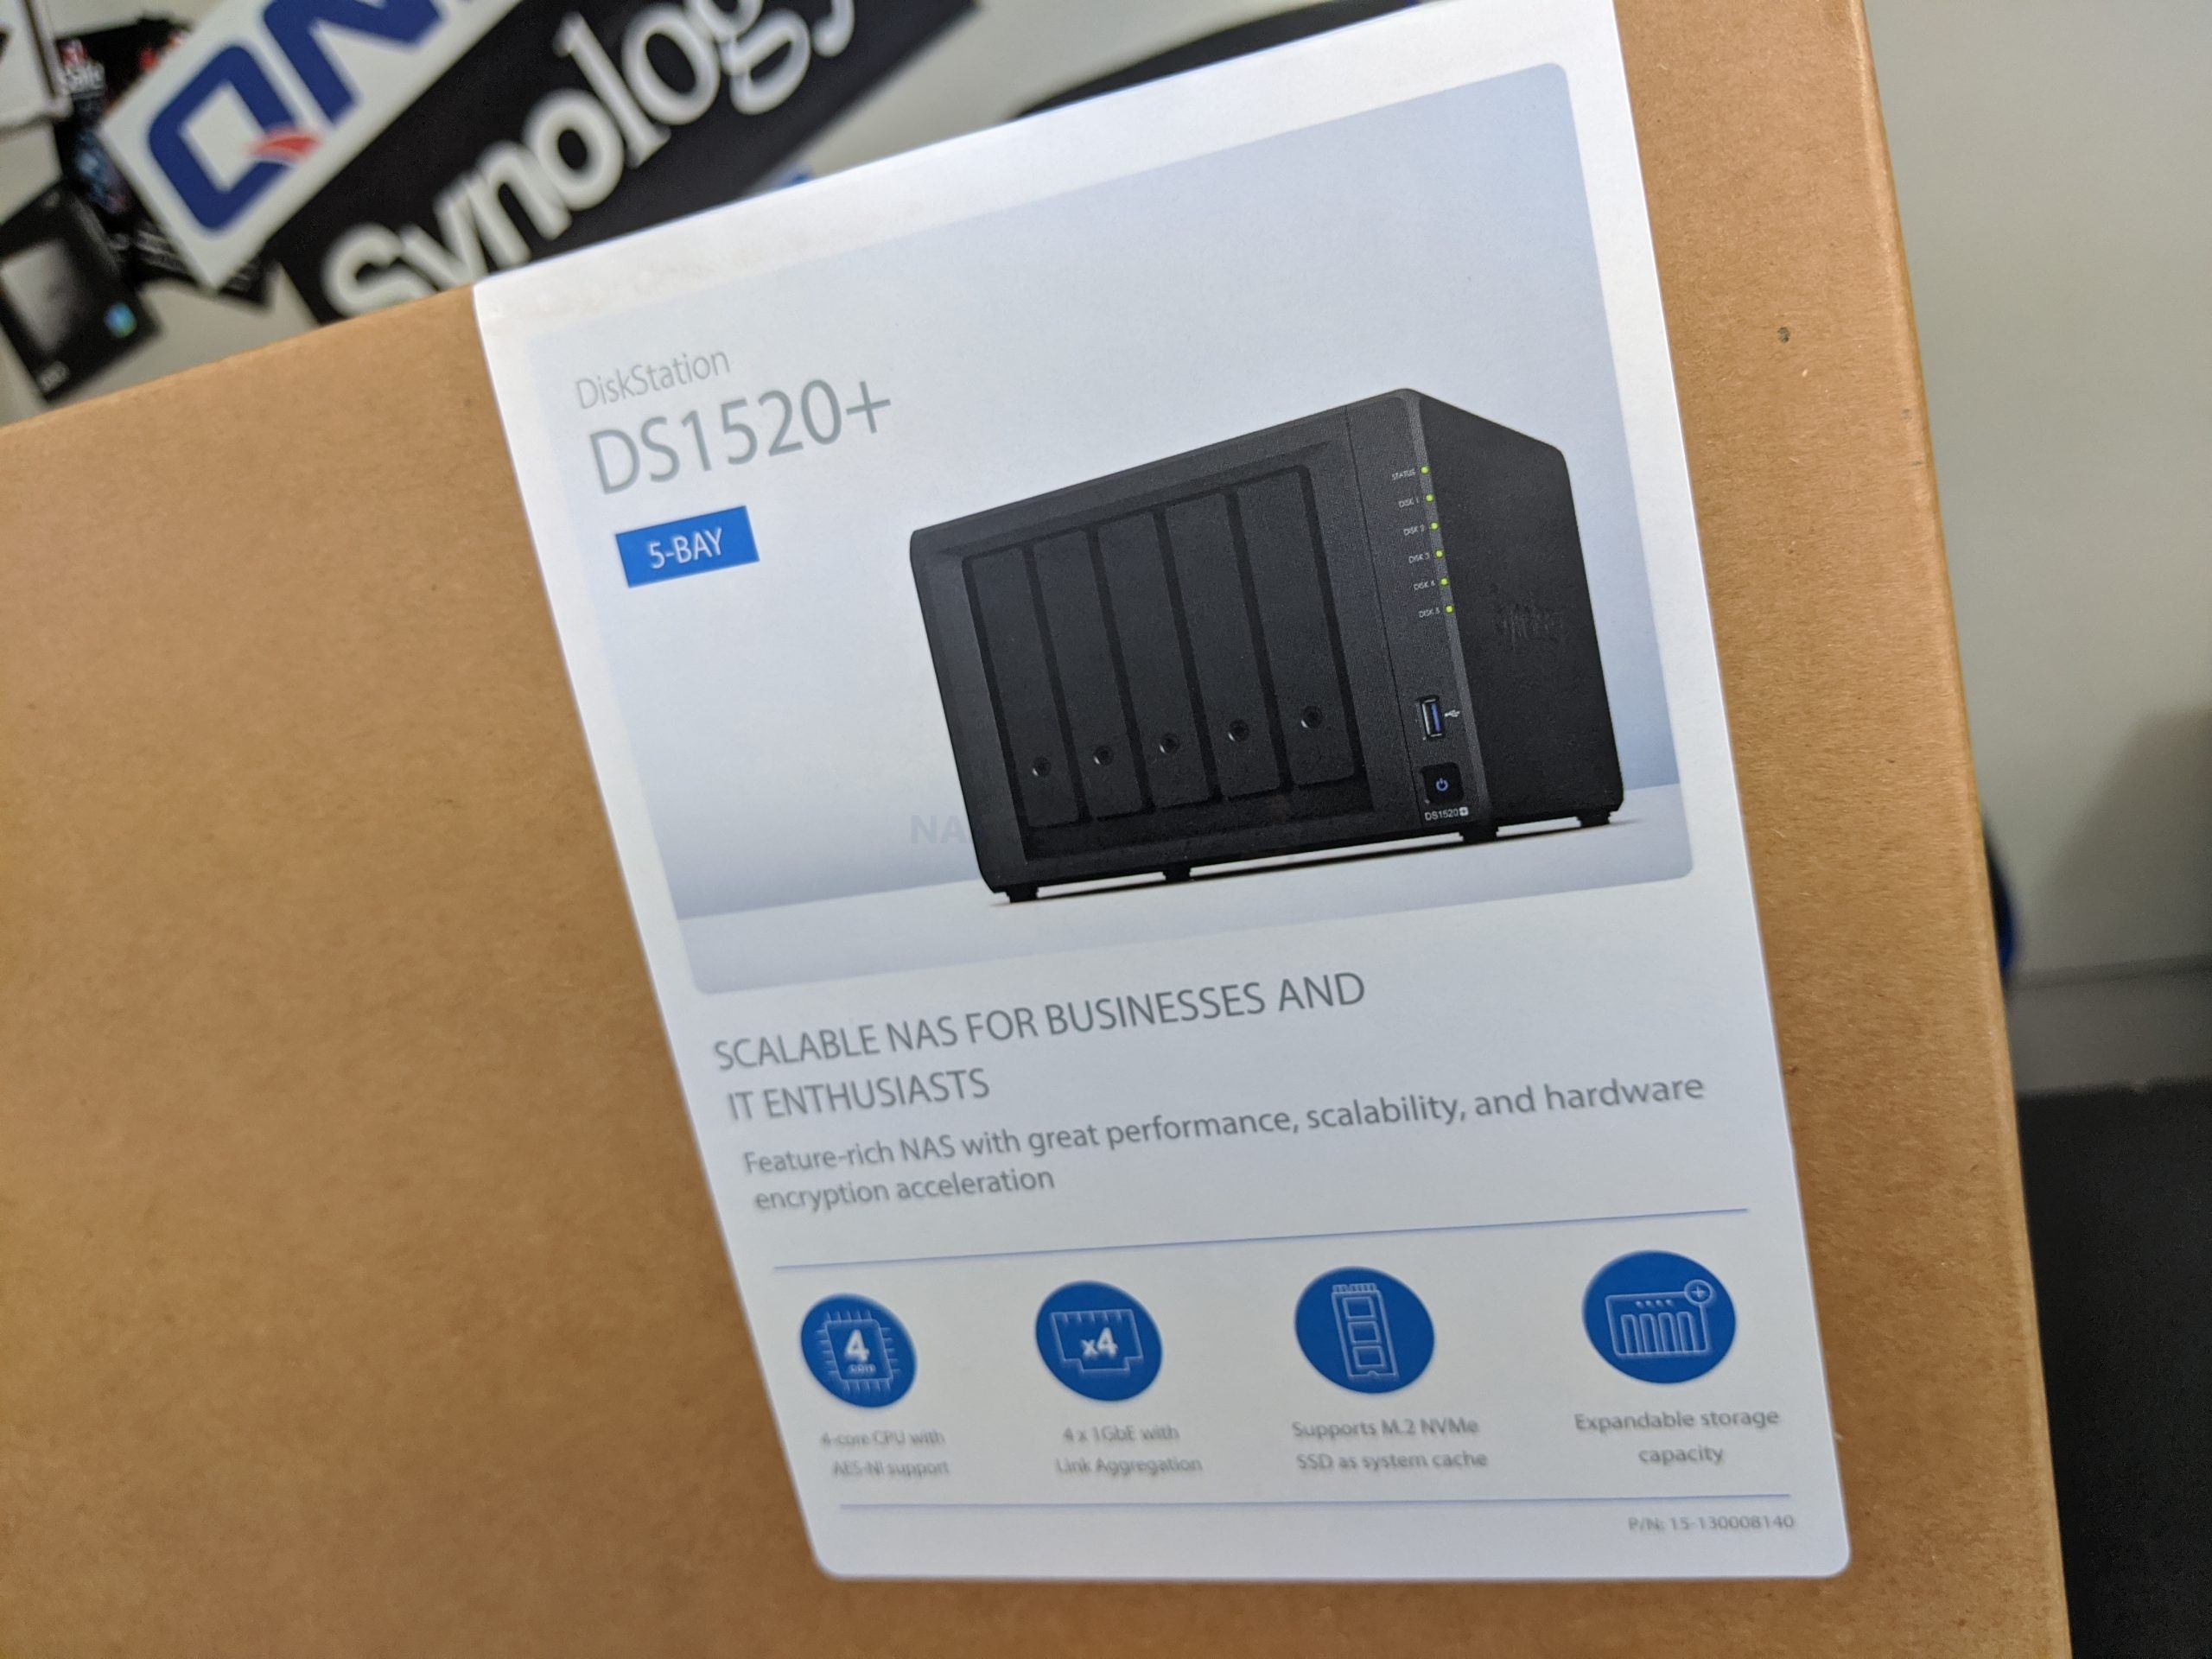 2 x 250GB of PRO NAS Drives and 500GB DS1520+ 5-Bay DiskStation Bundle with 8GB RAM and 30TB NVME Cache Fully Assembled and Tested by CustomTechSales 5 x 6TB 